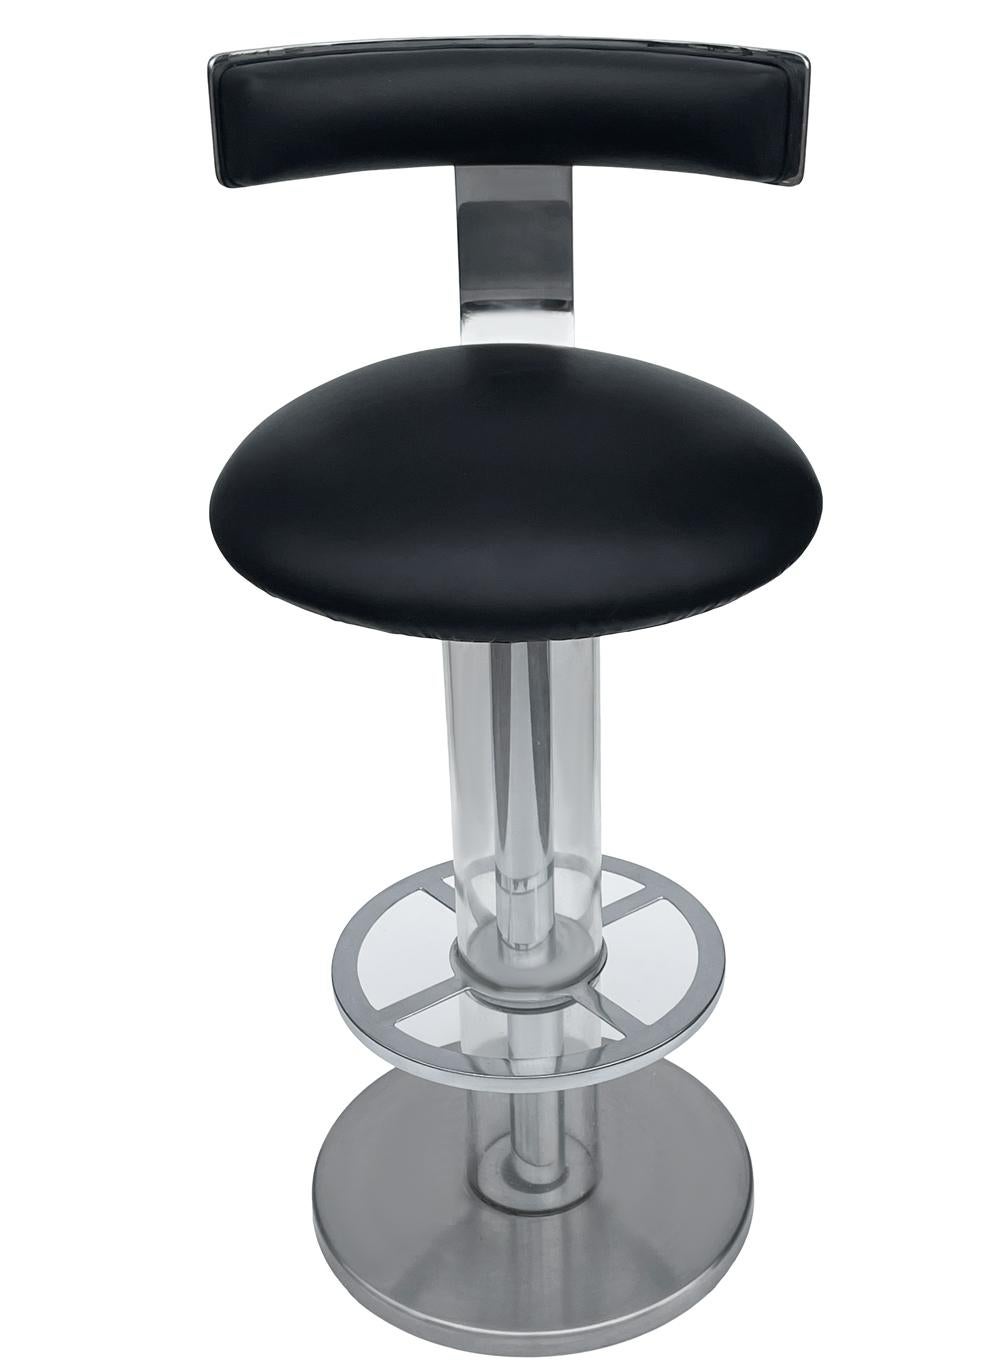 Leather Pair of Mid-Century Modern Bar Stools in Chrome & Black by Design For Leisure